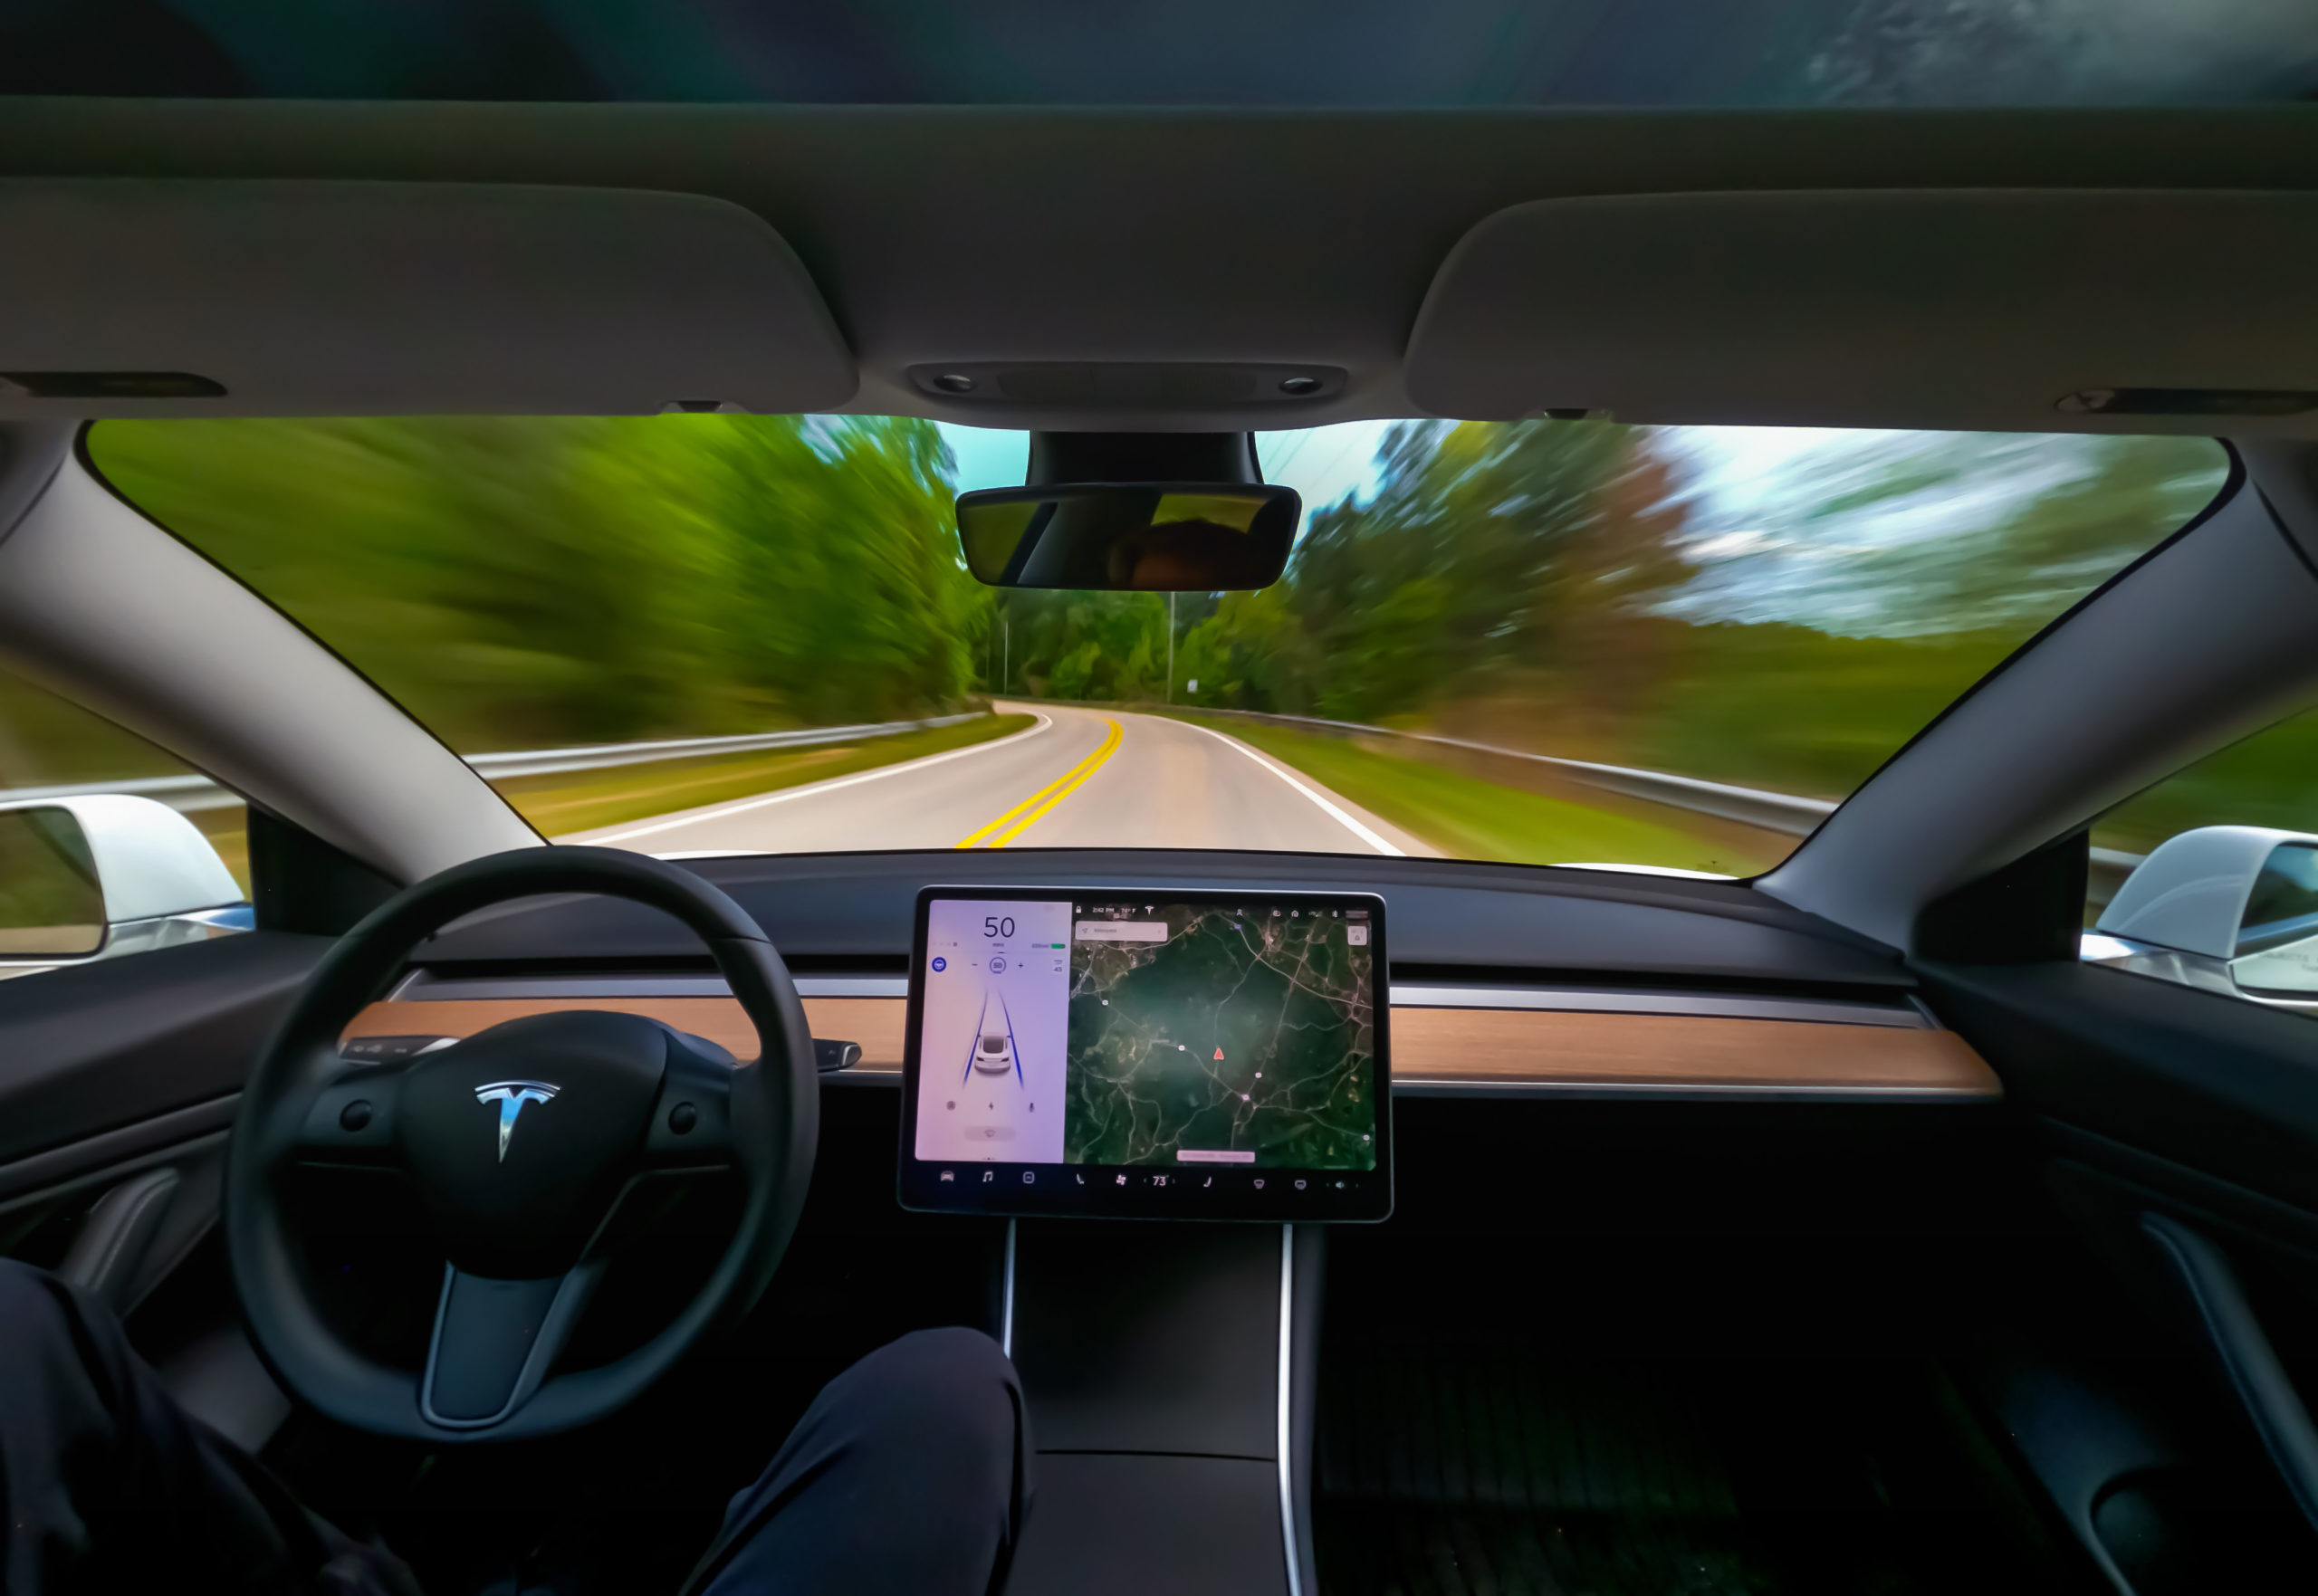 On Thursday, Tesla launched a recall to repair defects to the experimental “Full Self-Driving” software deployed on public roads.